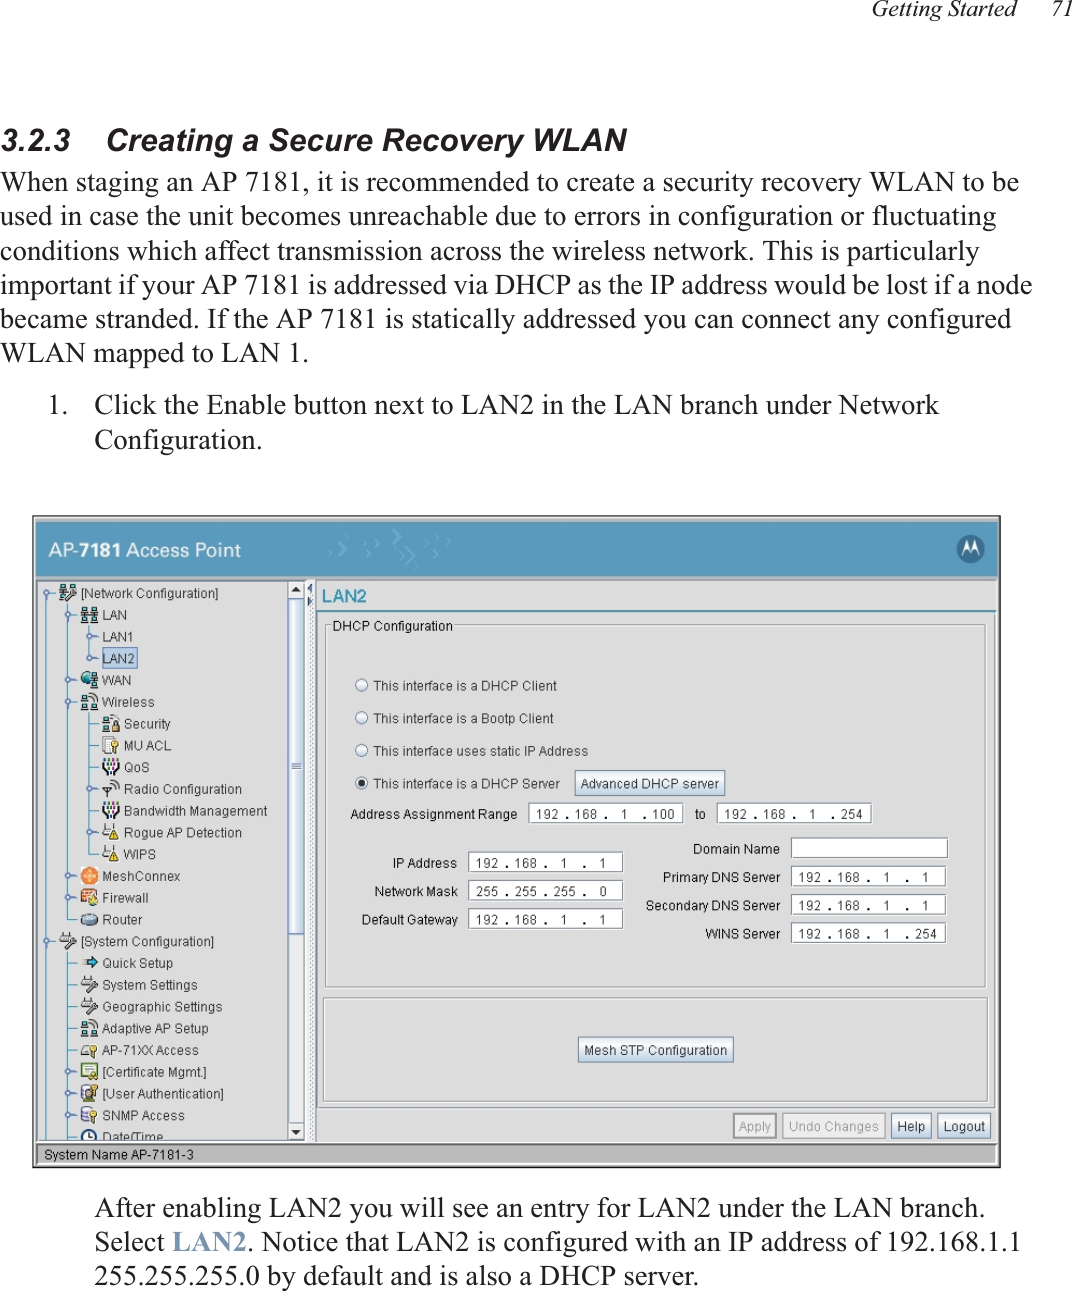 Getting Started 713.2.3    Creating a Secure Recovery WLANWhen staging an AP 7181, it is recommended to create a security recovery WLAN to be used in case the unit becomes unreachable due to errors in configuration or fluctuating conditions which affect transmission across the wireless network. This is particularly important if your AP 7181 is addressed via DHCP as the IP address would be lost if a node became stranded. If the AP 7181 is statically addressed you can connect any configured WLAN mapped to LAN 1.1. Click the Enable button next to LAN2 in the LAN branch under Network Configuration.After enabling LAN2 you will see an entry for LAN2 under the LAN branch.  Select LAN2. Notice that LAN2 is configured with an IP address of 192.168.1.1 255.255.255.0 by default and is also a DHCP server.